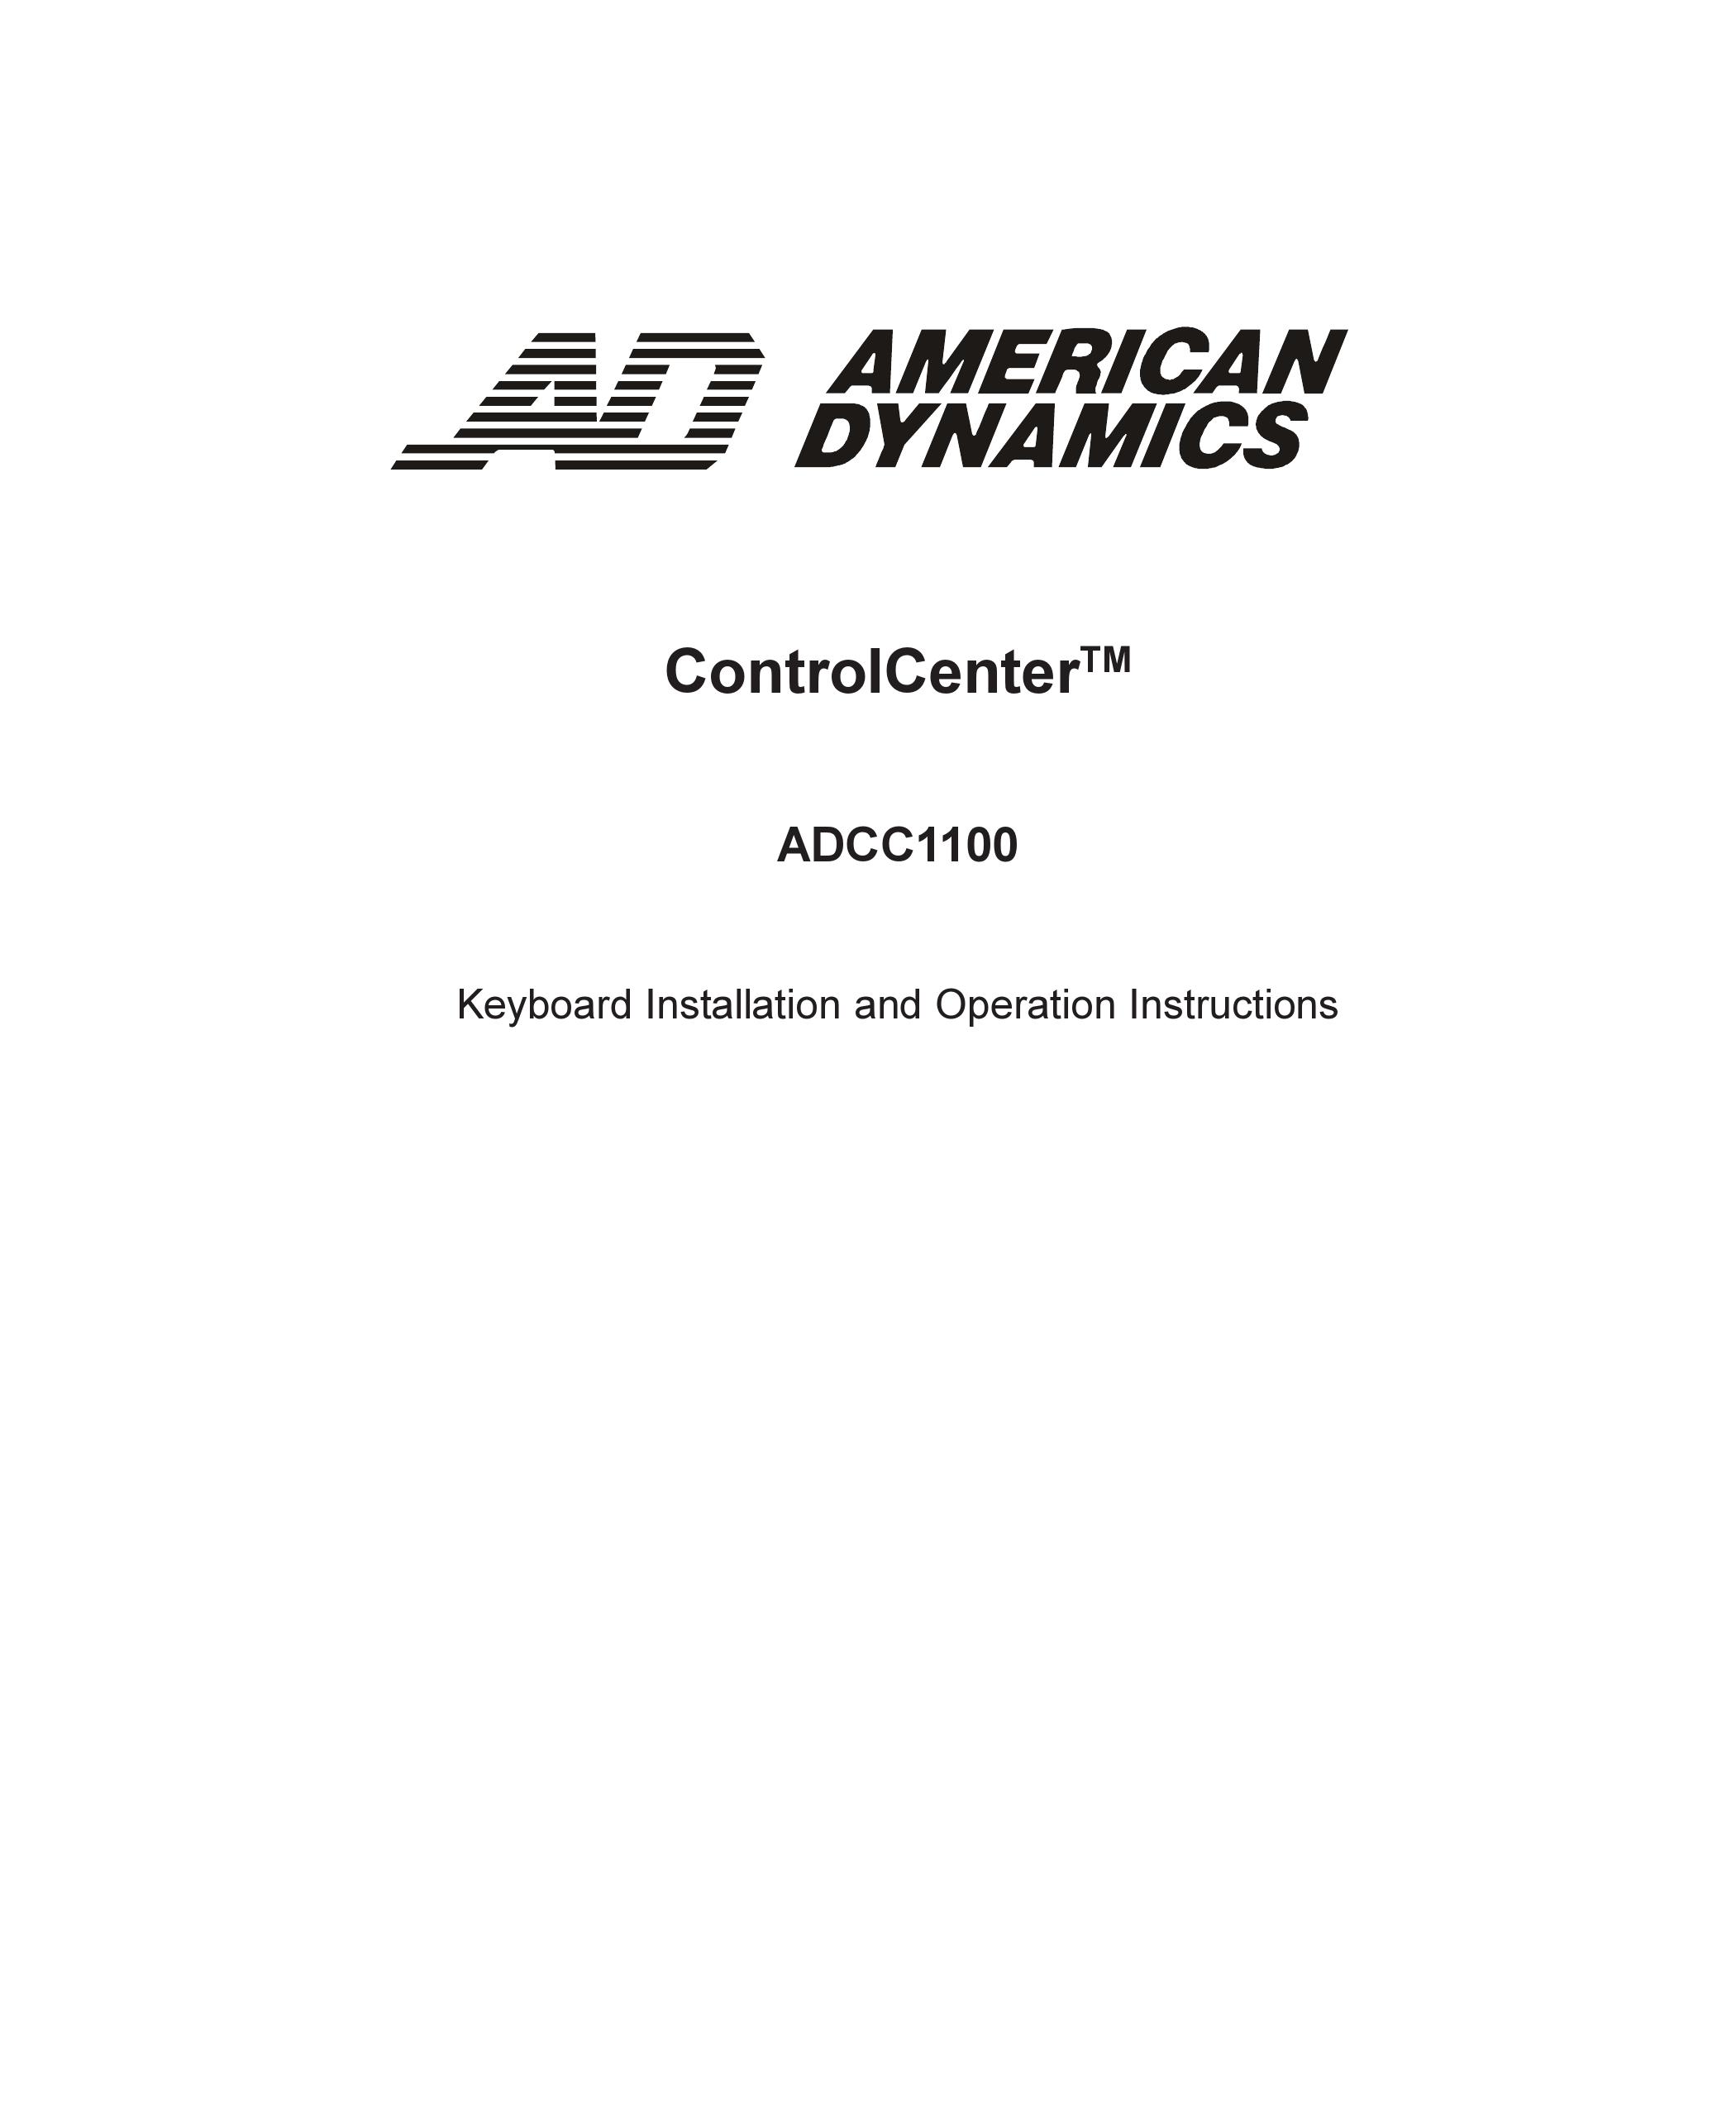 American Dynamics ADCC1100 Electronic Keyboard User Manual (Page 1)